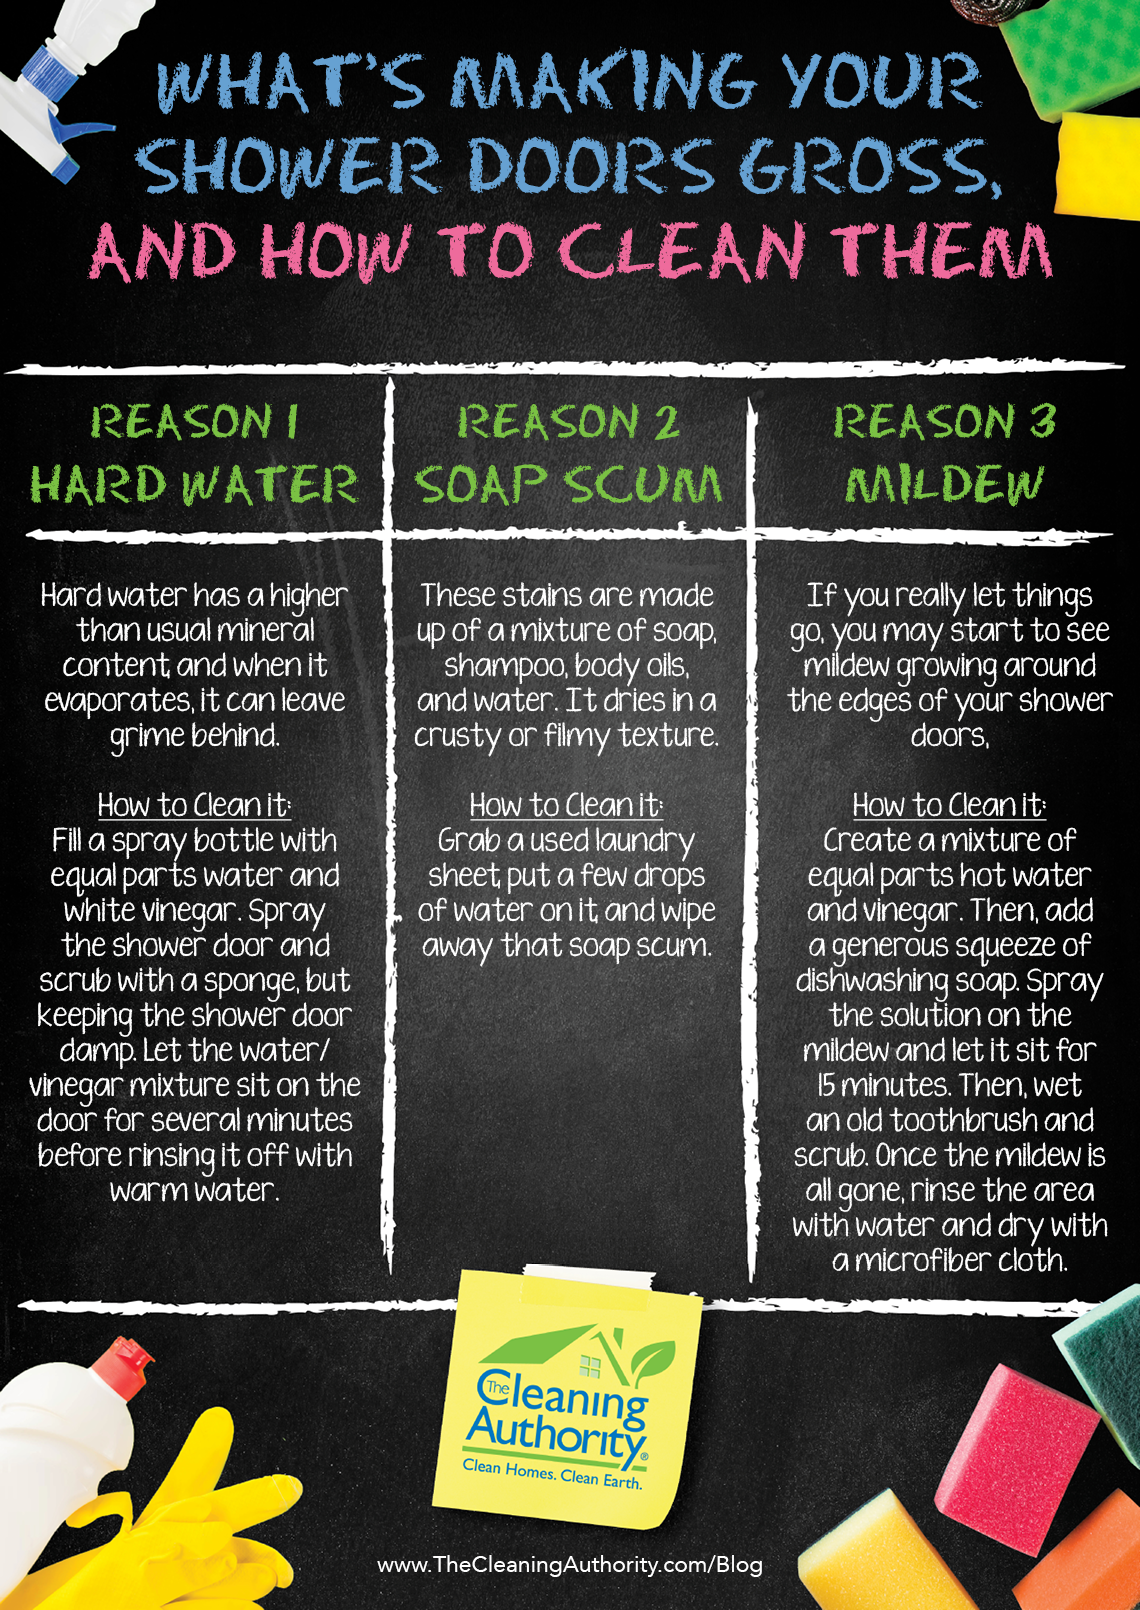 How to clean grimy shower doors infographic